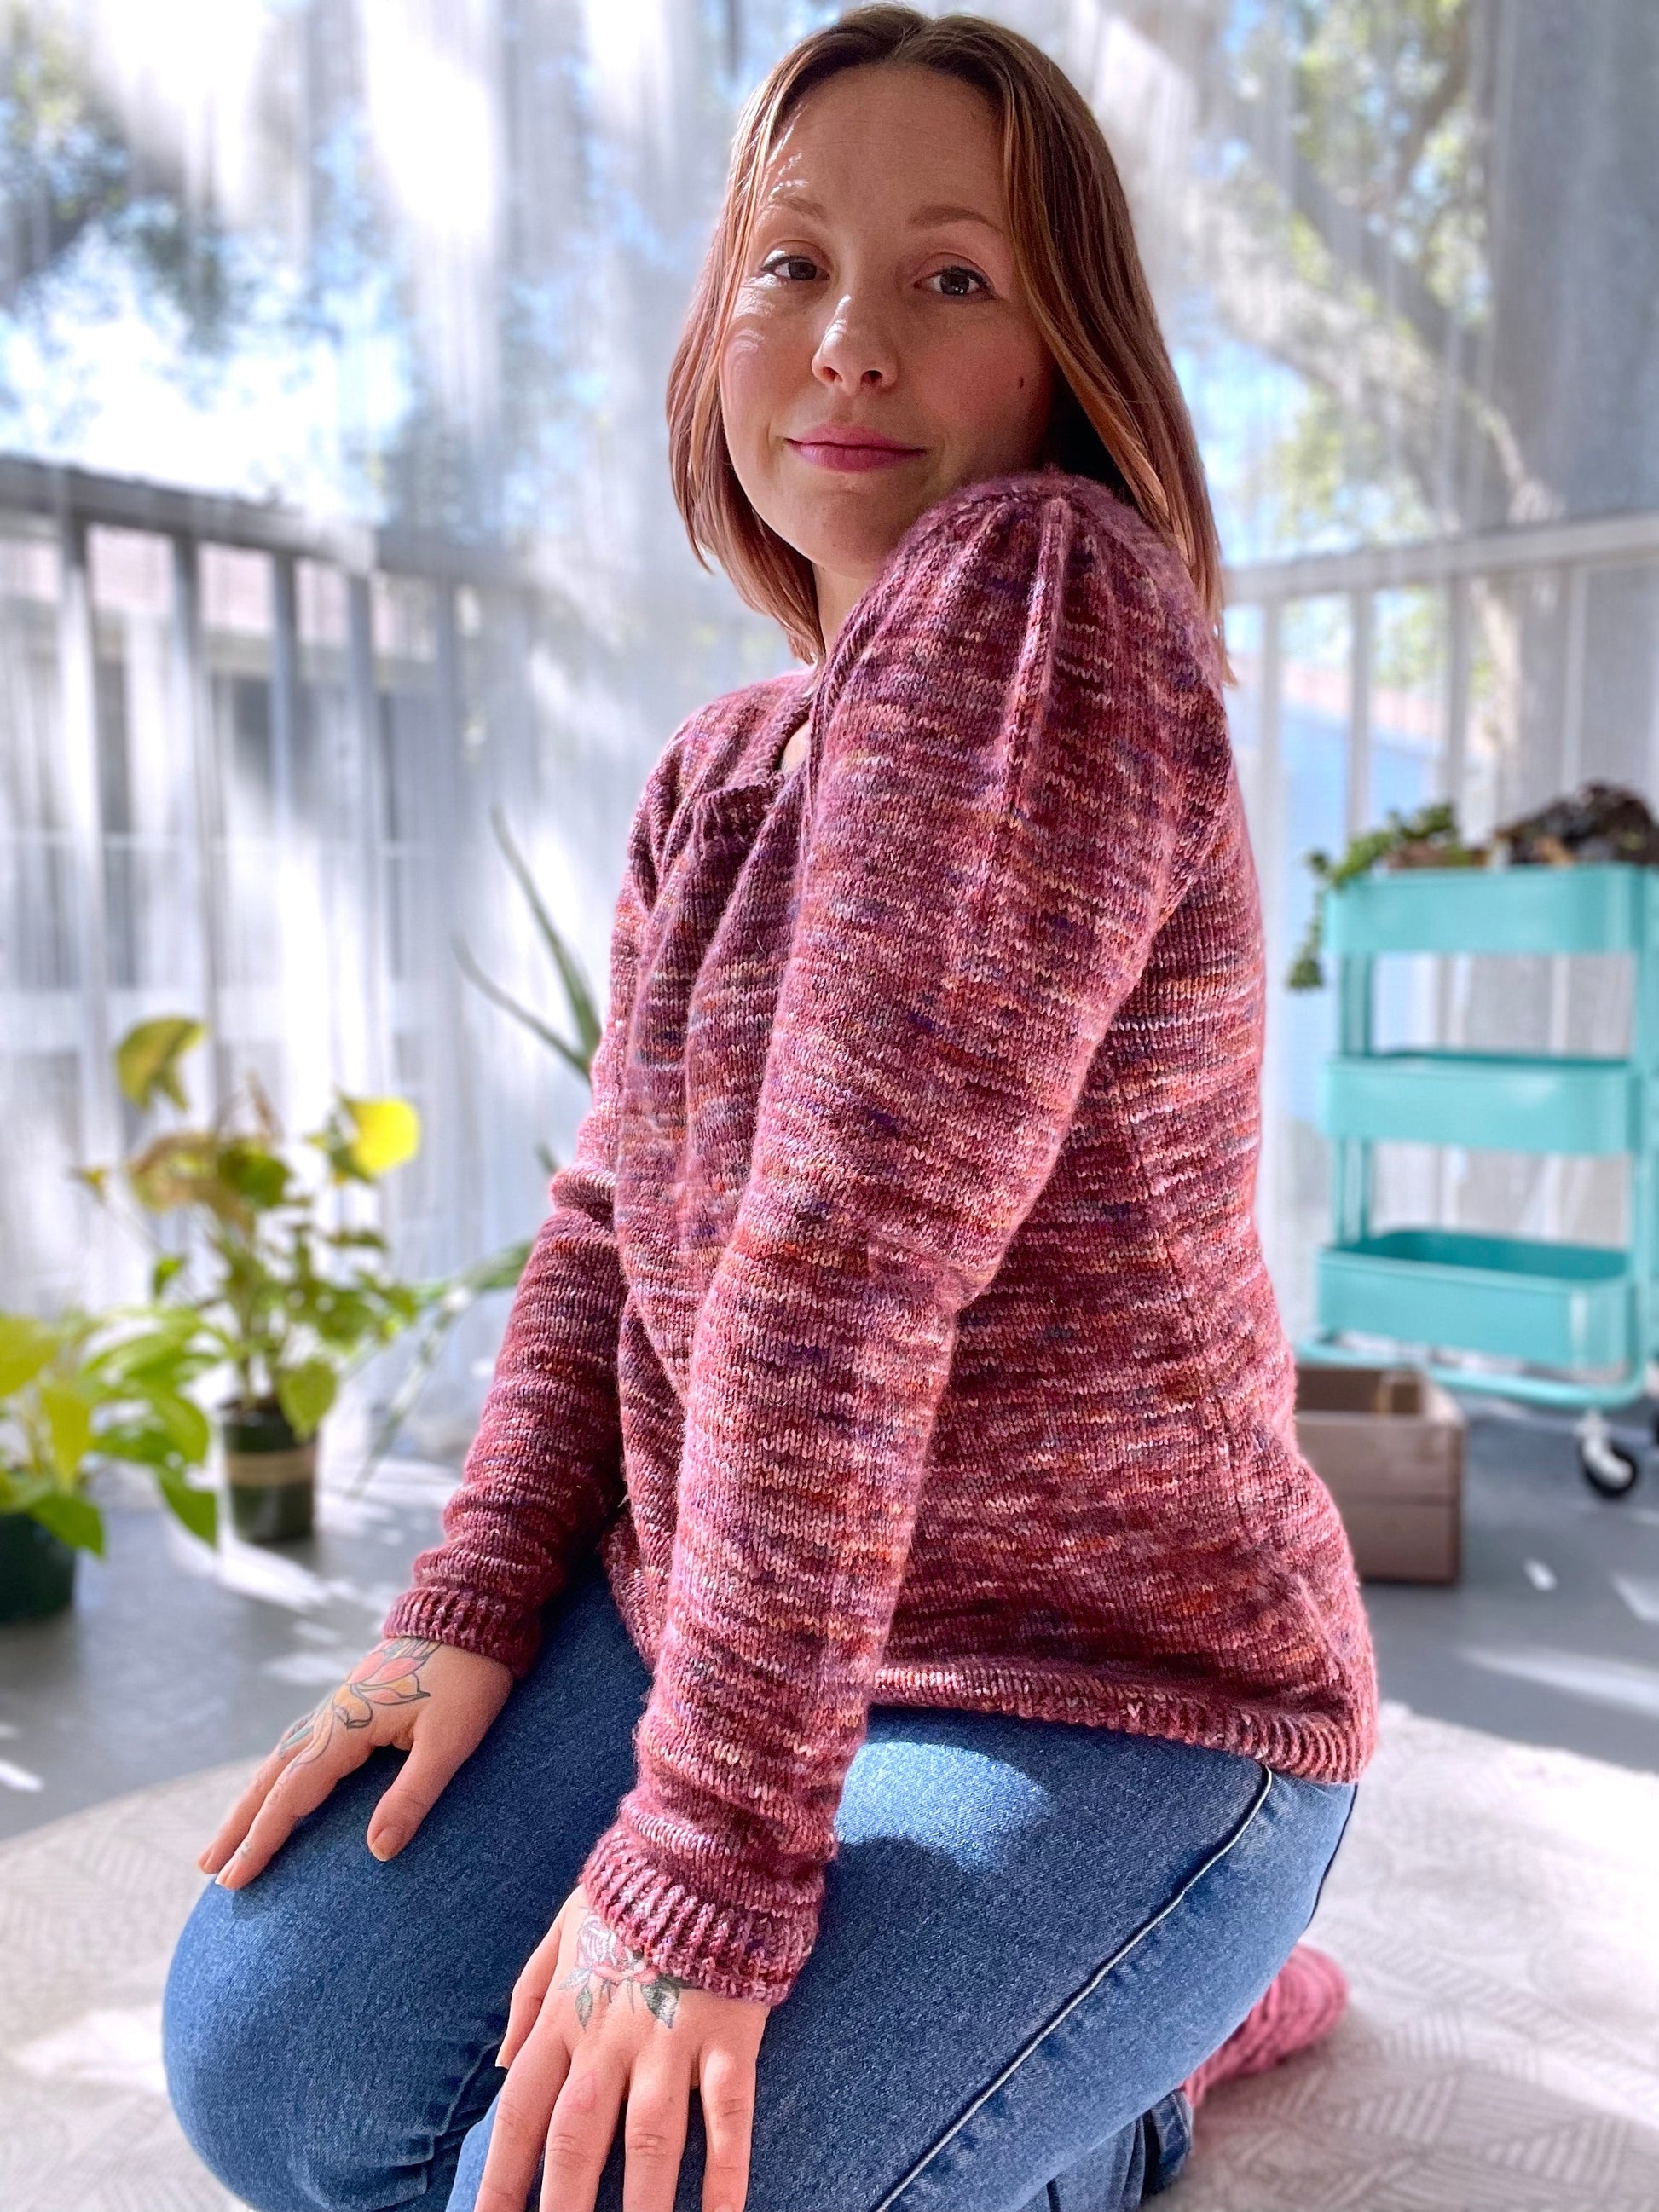 Seen from an angle, Bess kneels on the floor, smiling at the camera. She wears a pink variegated sweater with pleated ruffle sleeves.